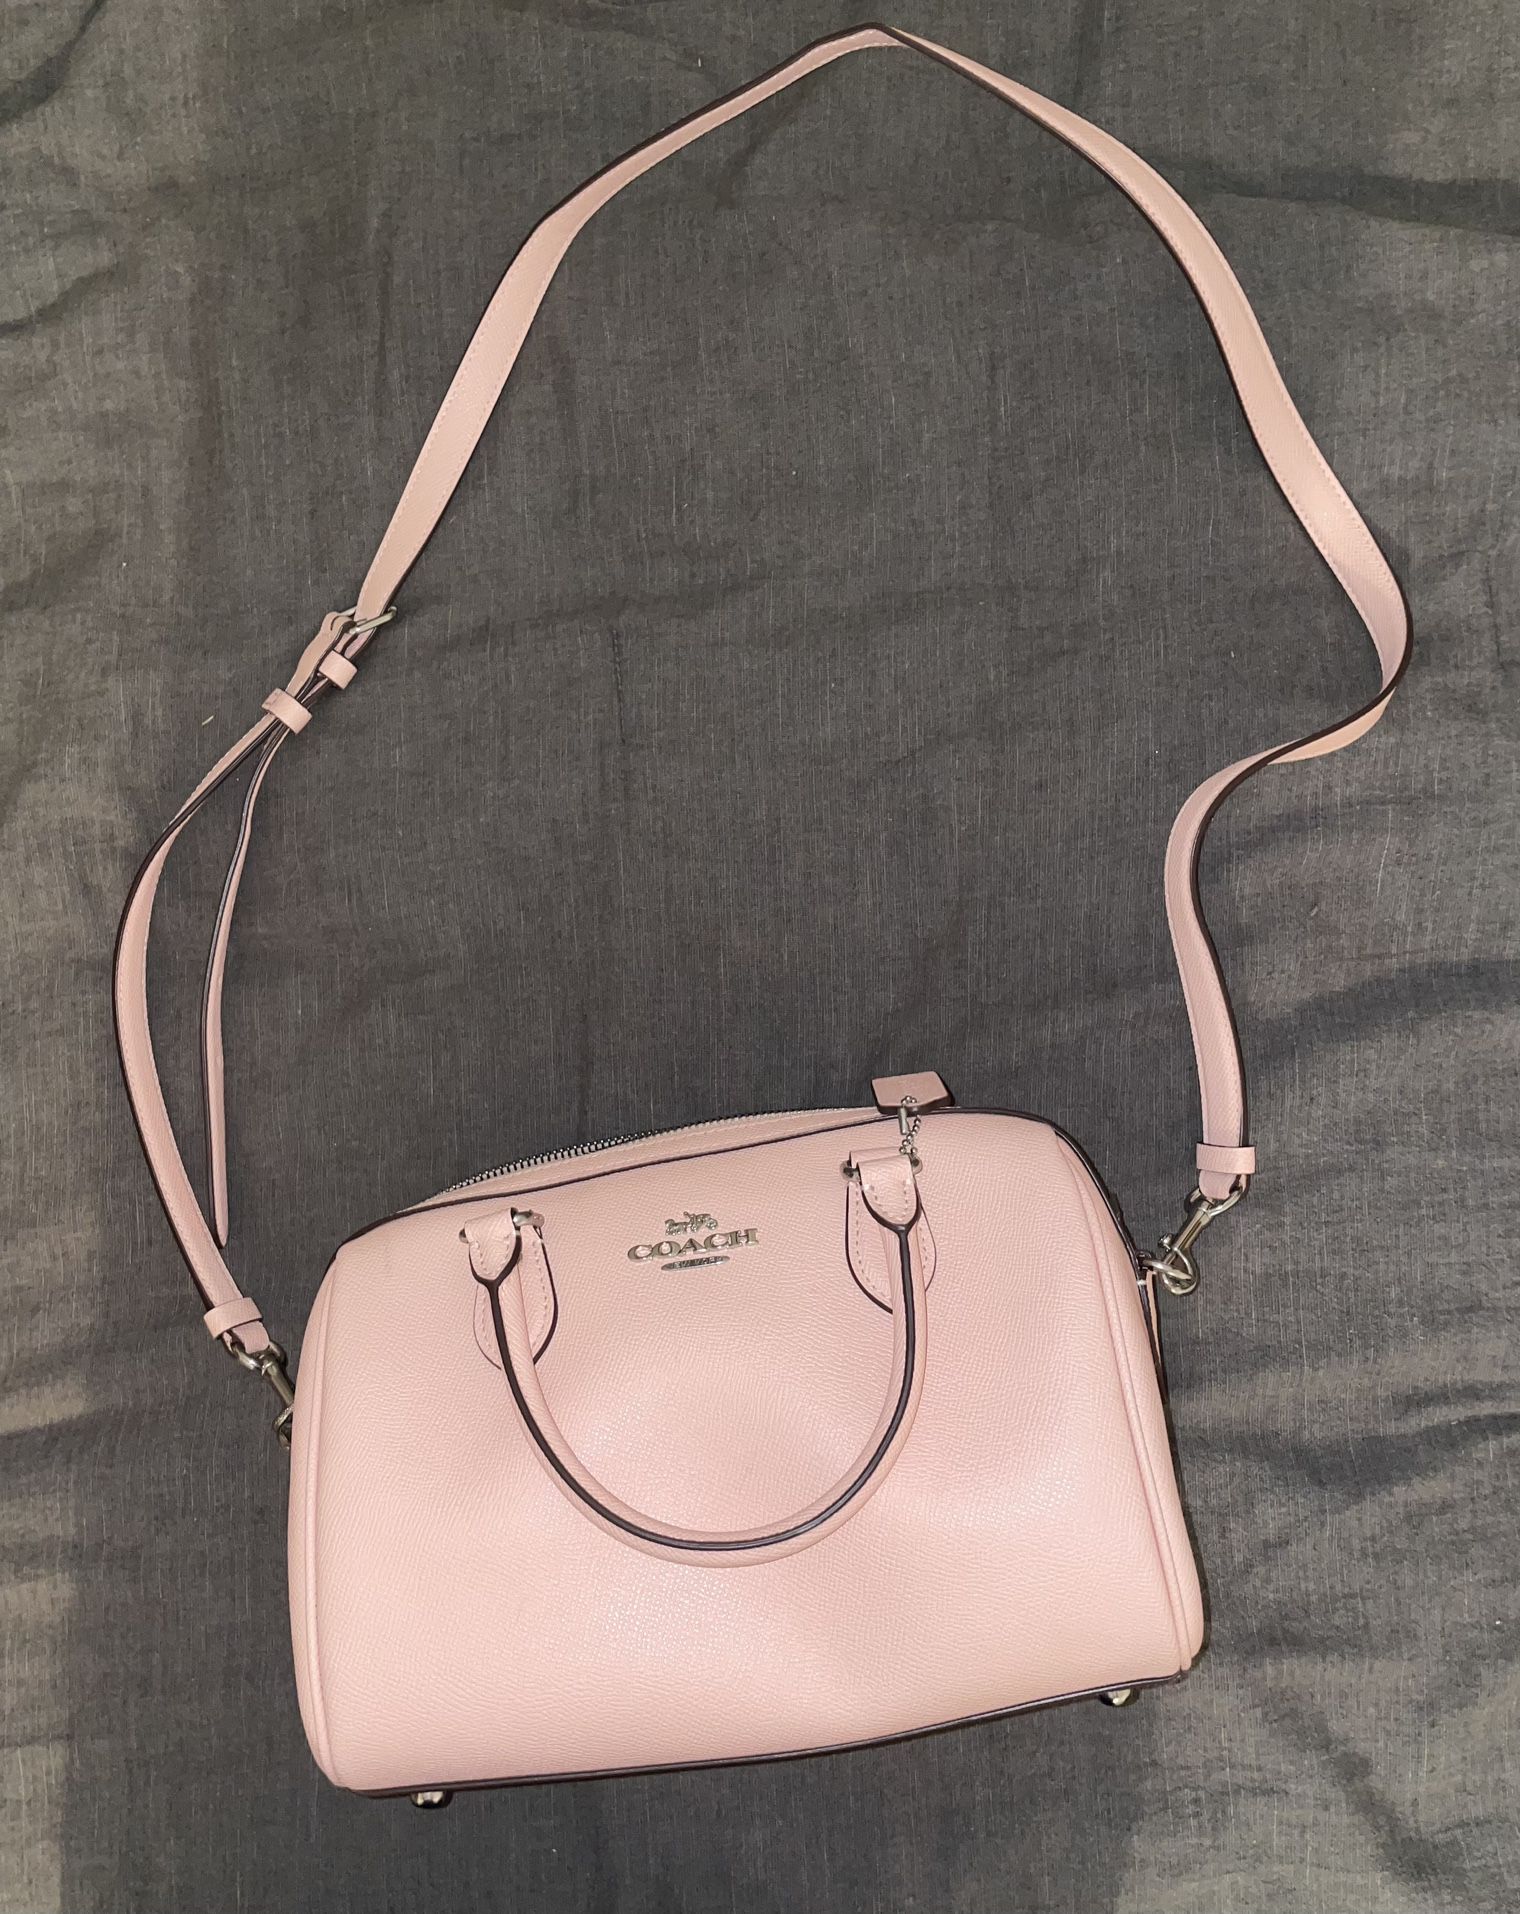 Pink Coach Purse (barely used)